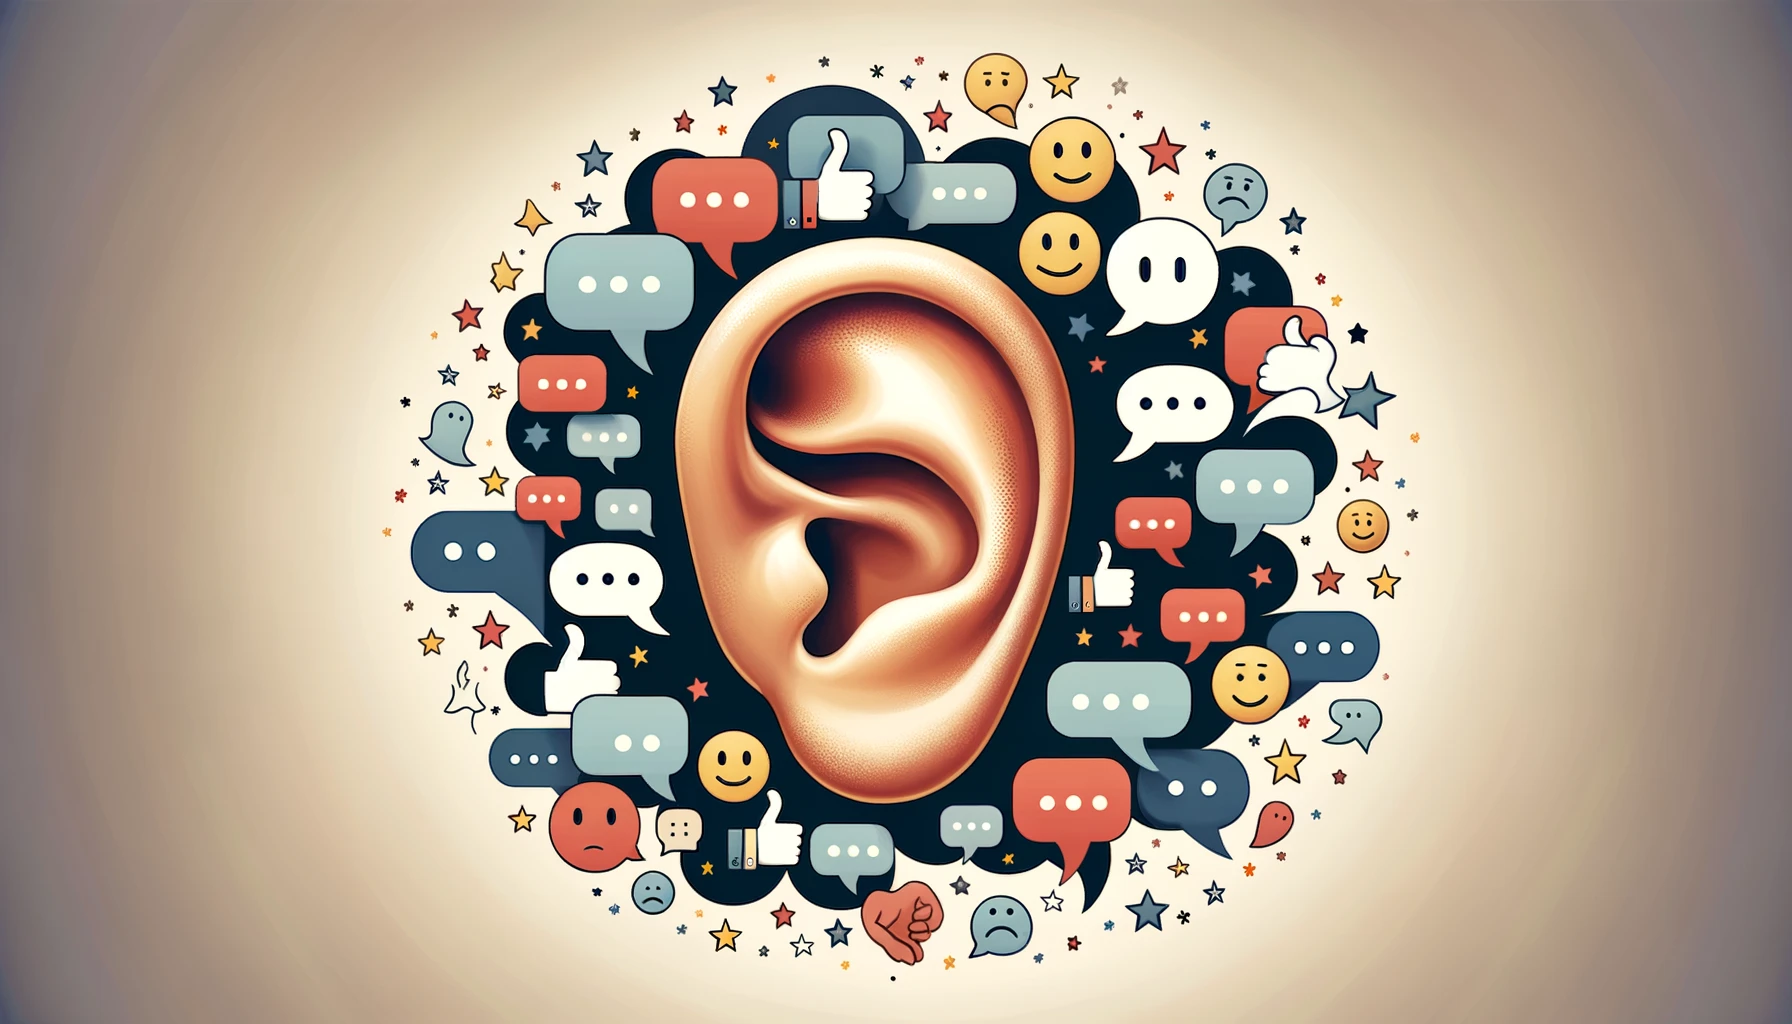 An ear centered in a wide image, surrounded by speech bubbles containing symbols of online customer feedback. Scattered around are thumbs up, thumbs down, smiley faces, and frowny faces, illustrating a company's engagement with feedback for business innovation.